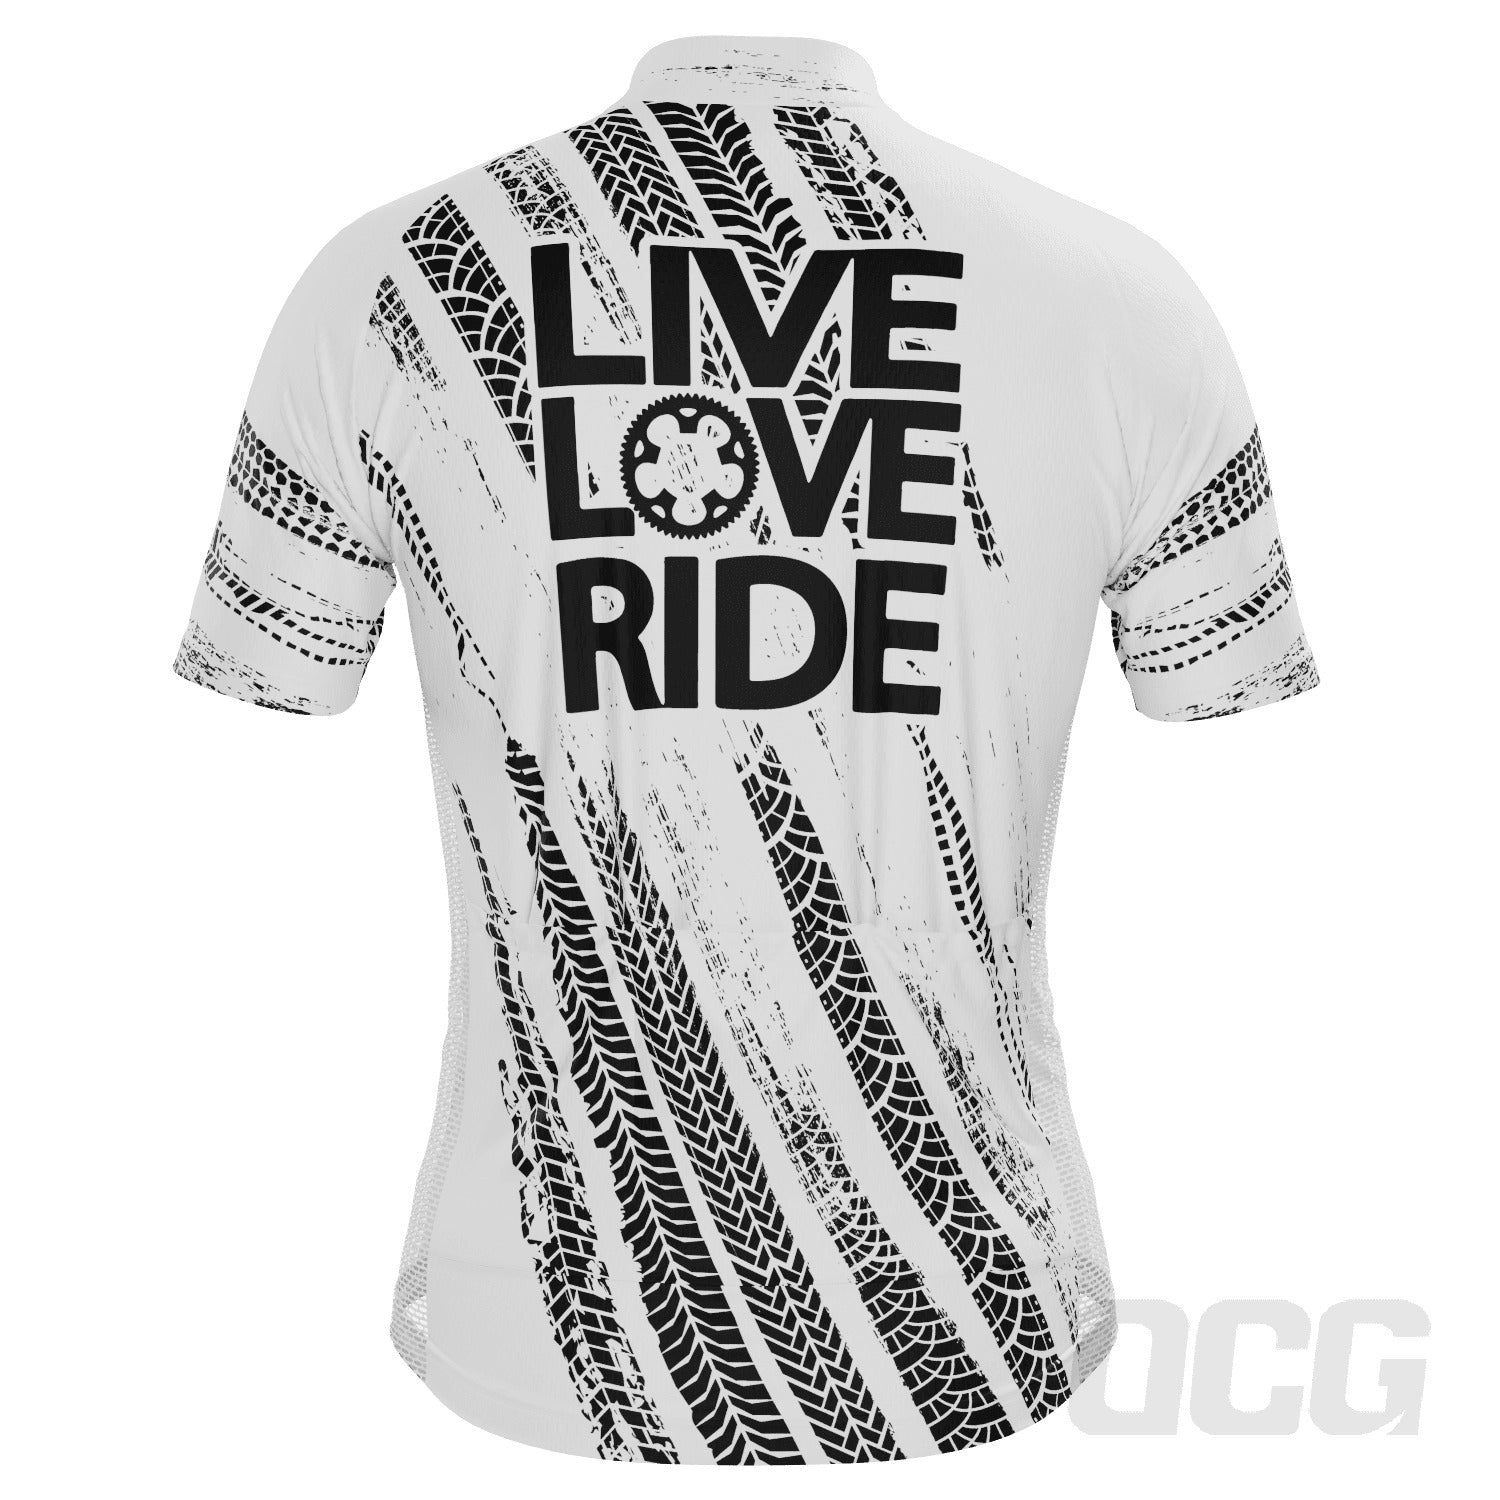 Men's Live Love Ride Short Sleeve Cycling Jersey